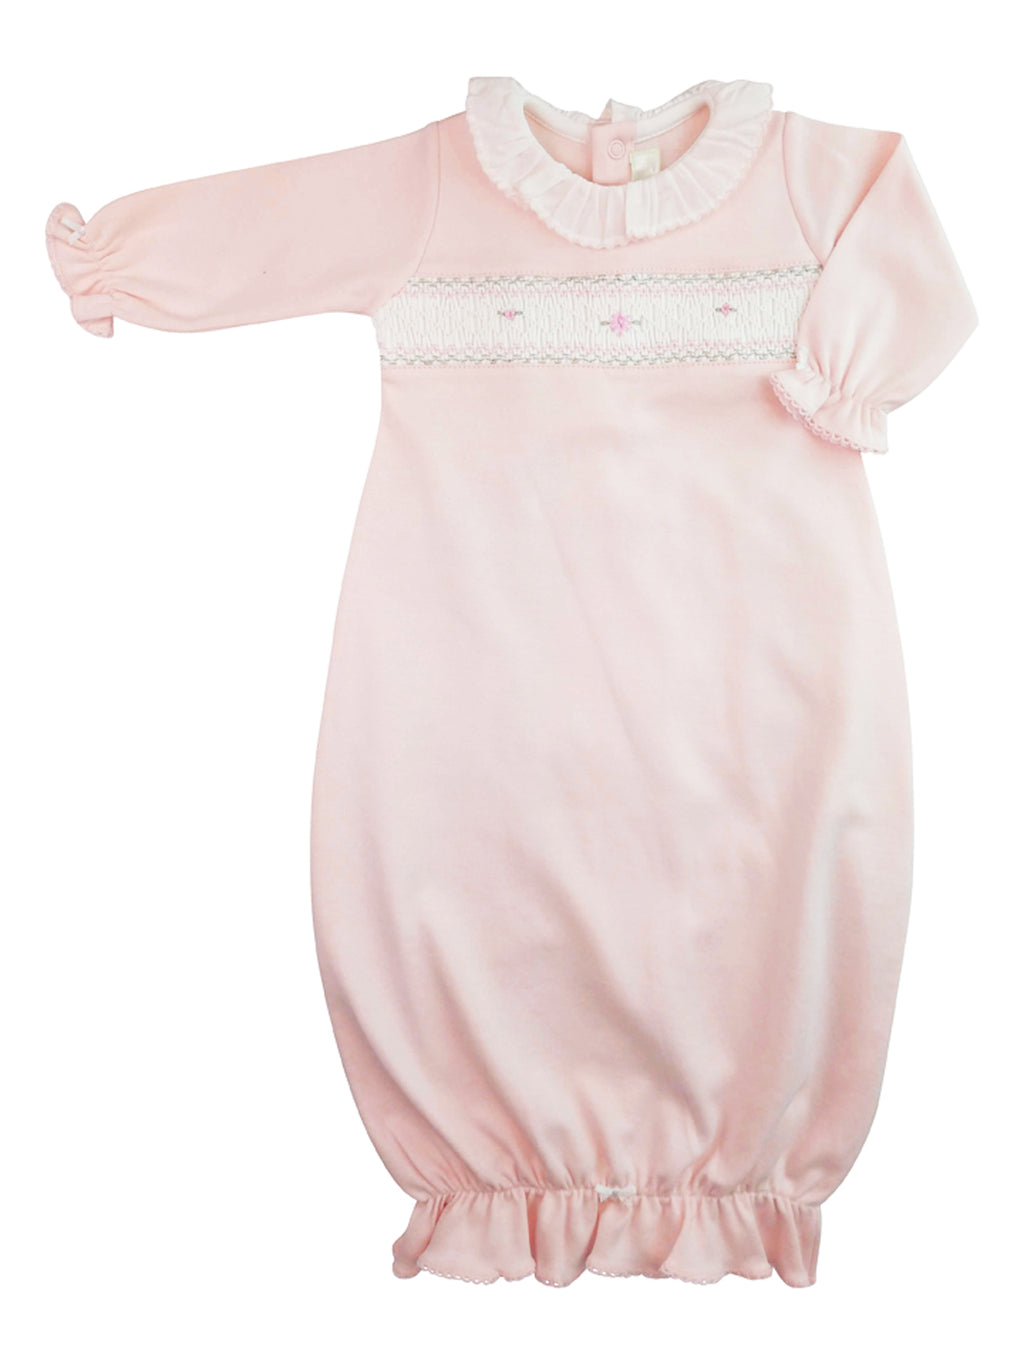 Pink hand smocked baby girl daygown - Little Threads Inc. Children's Clothing